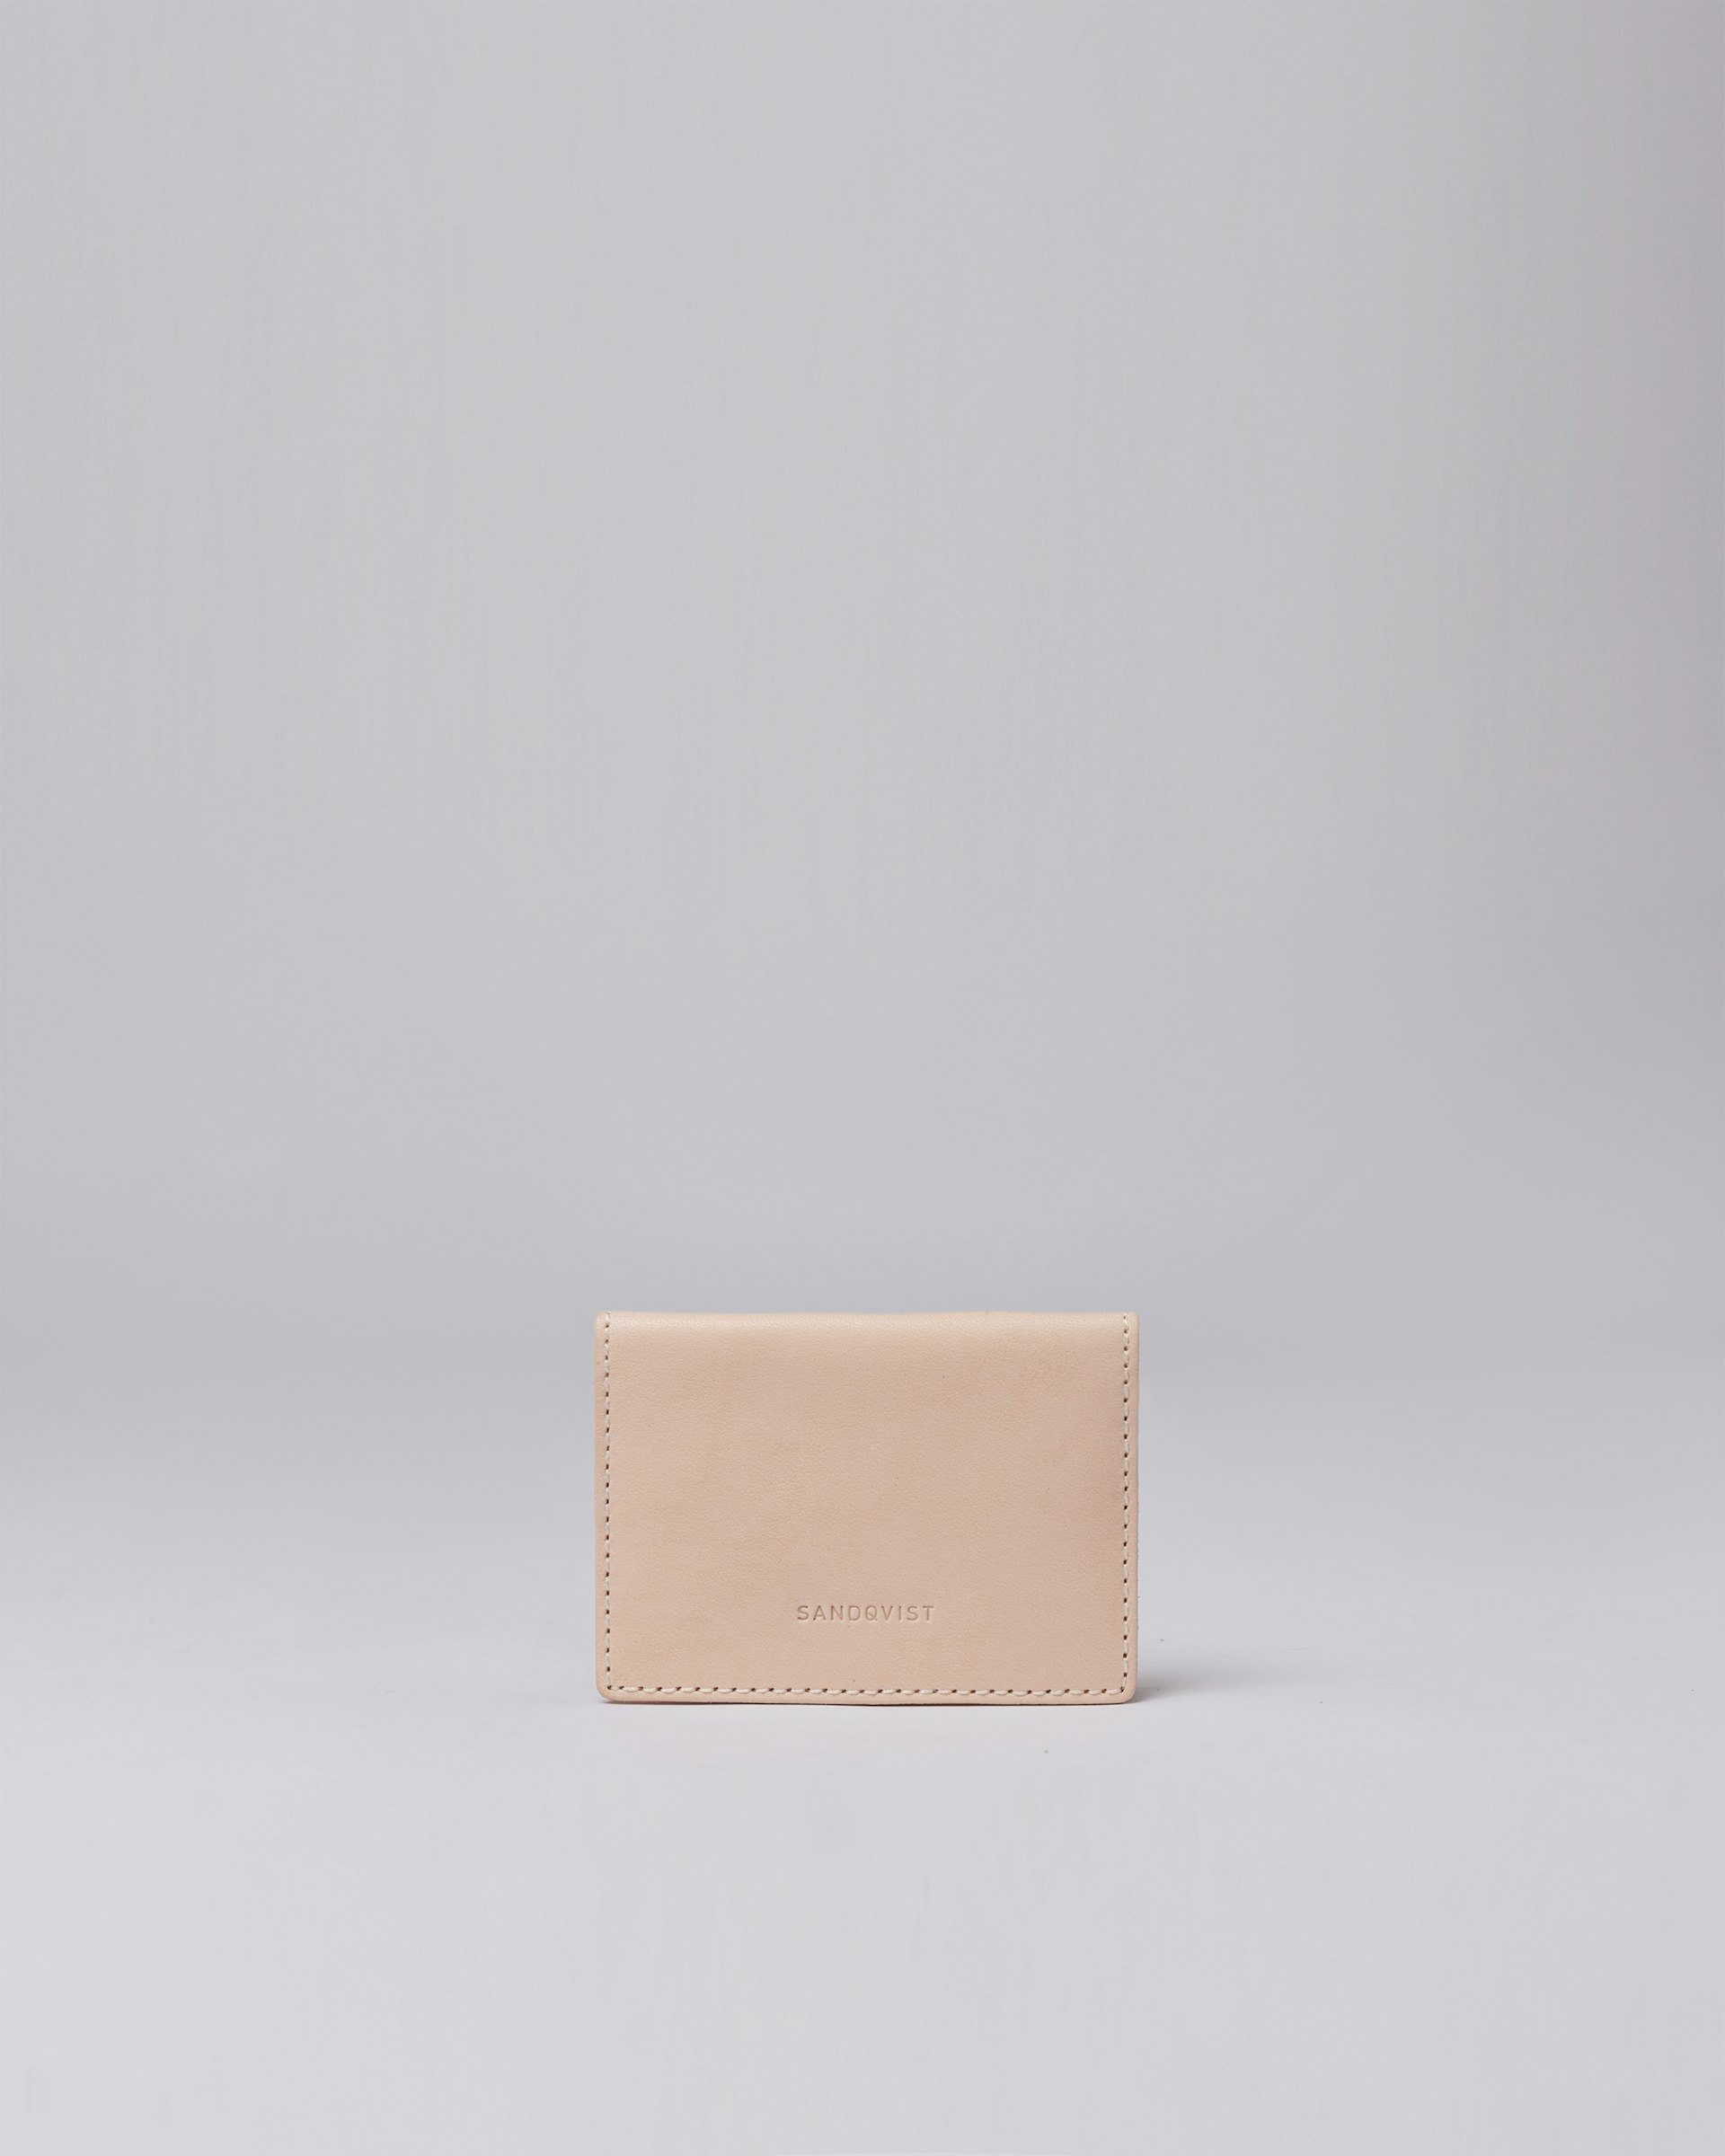 Noomi belongs to the category Wallets and is in color natural leather